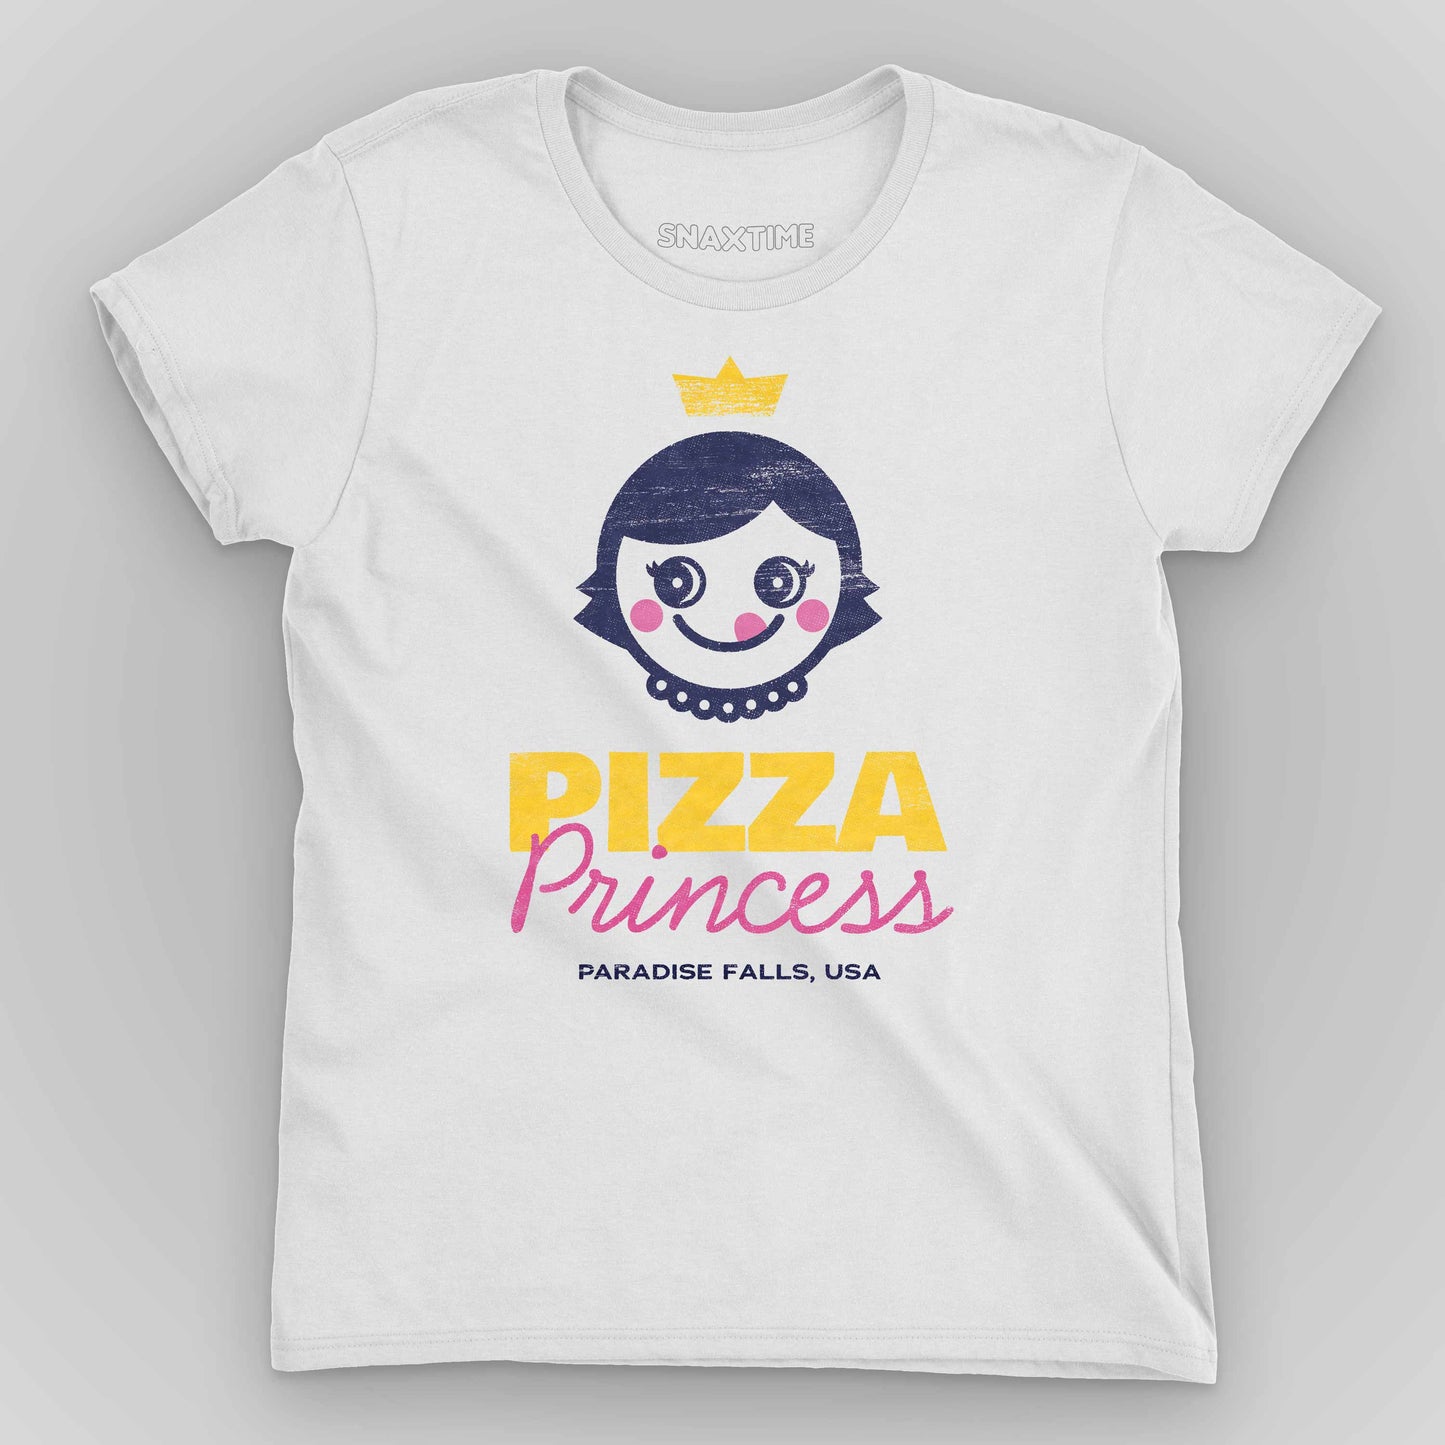 White Pizza Princess Women's Graphic T-Shirt by Snaxtime